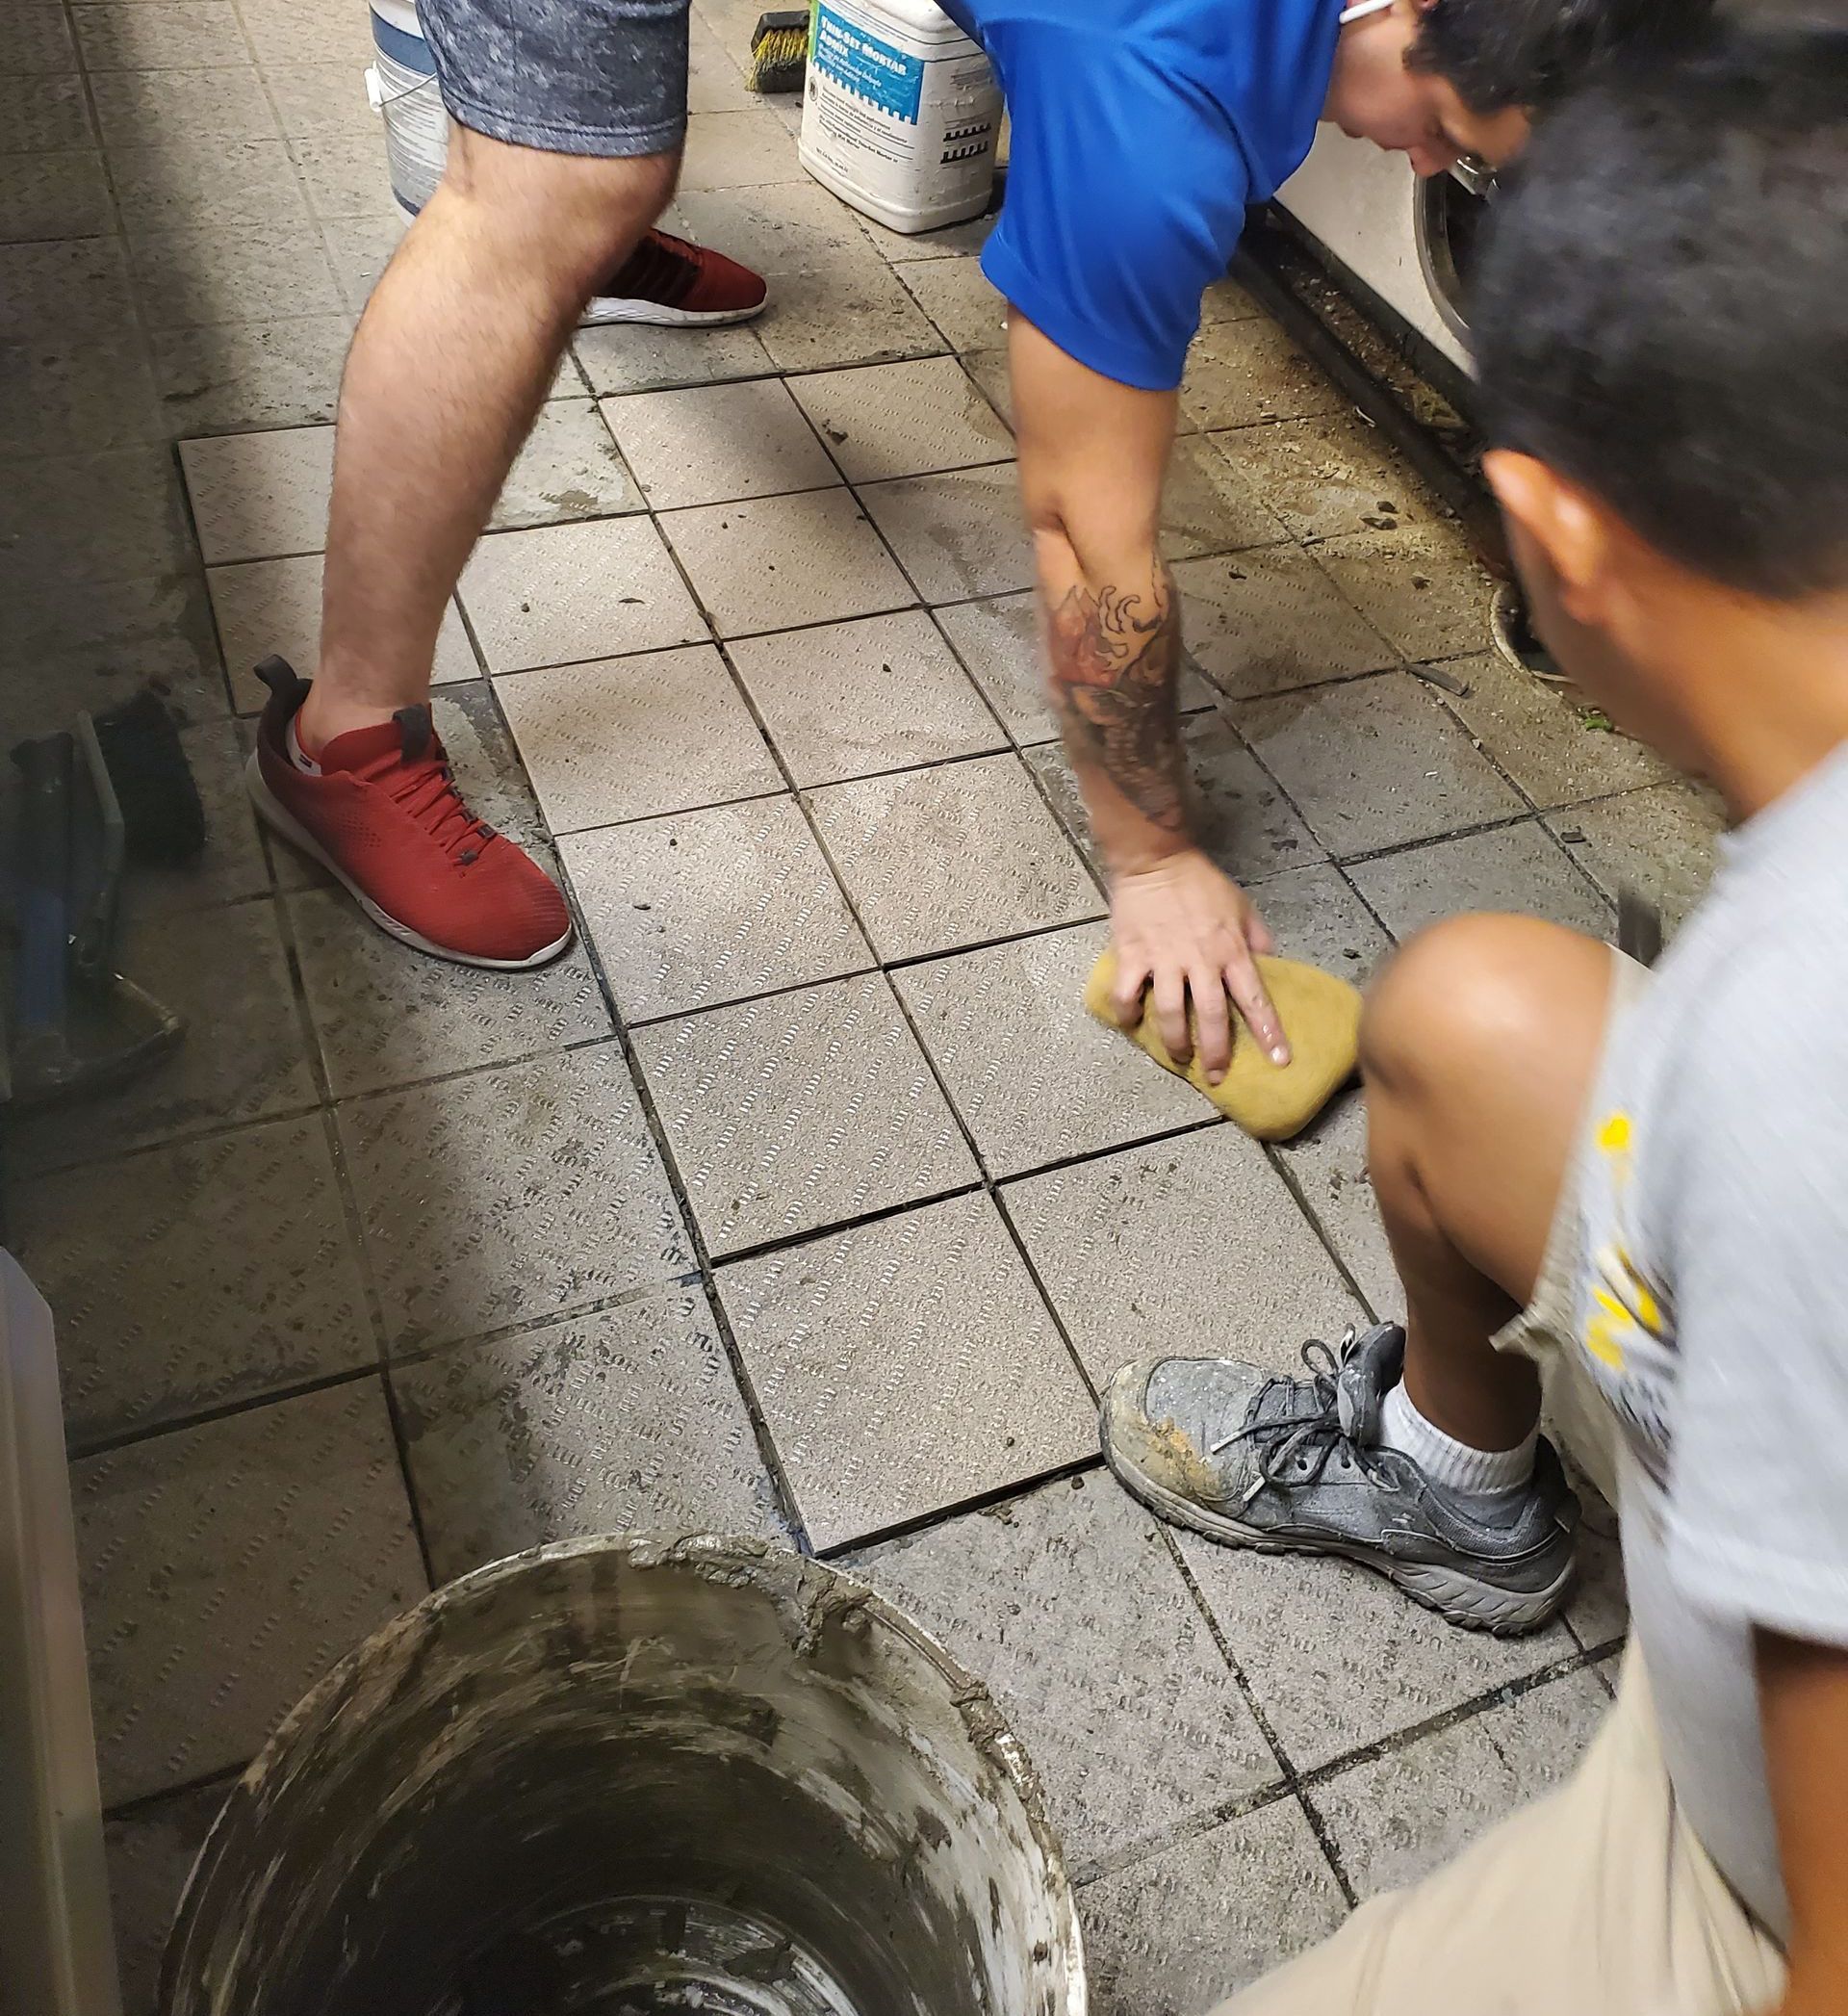 a man in a blue shirt is cleaning a tile floor with a sponge